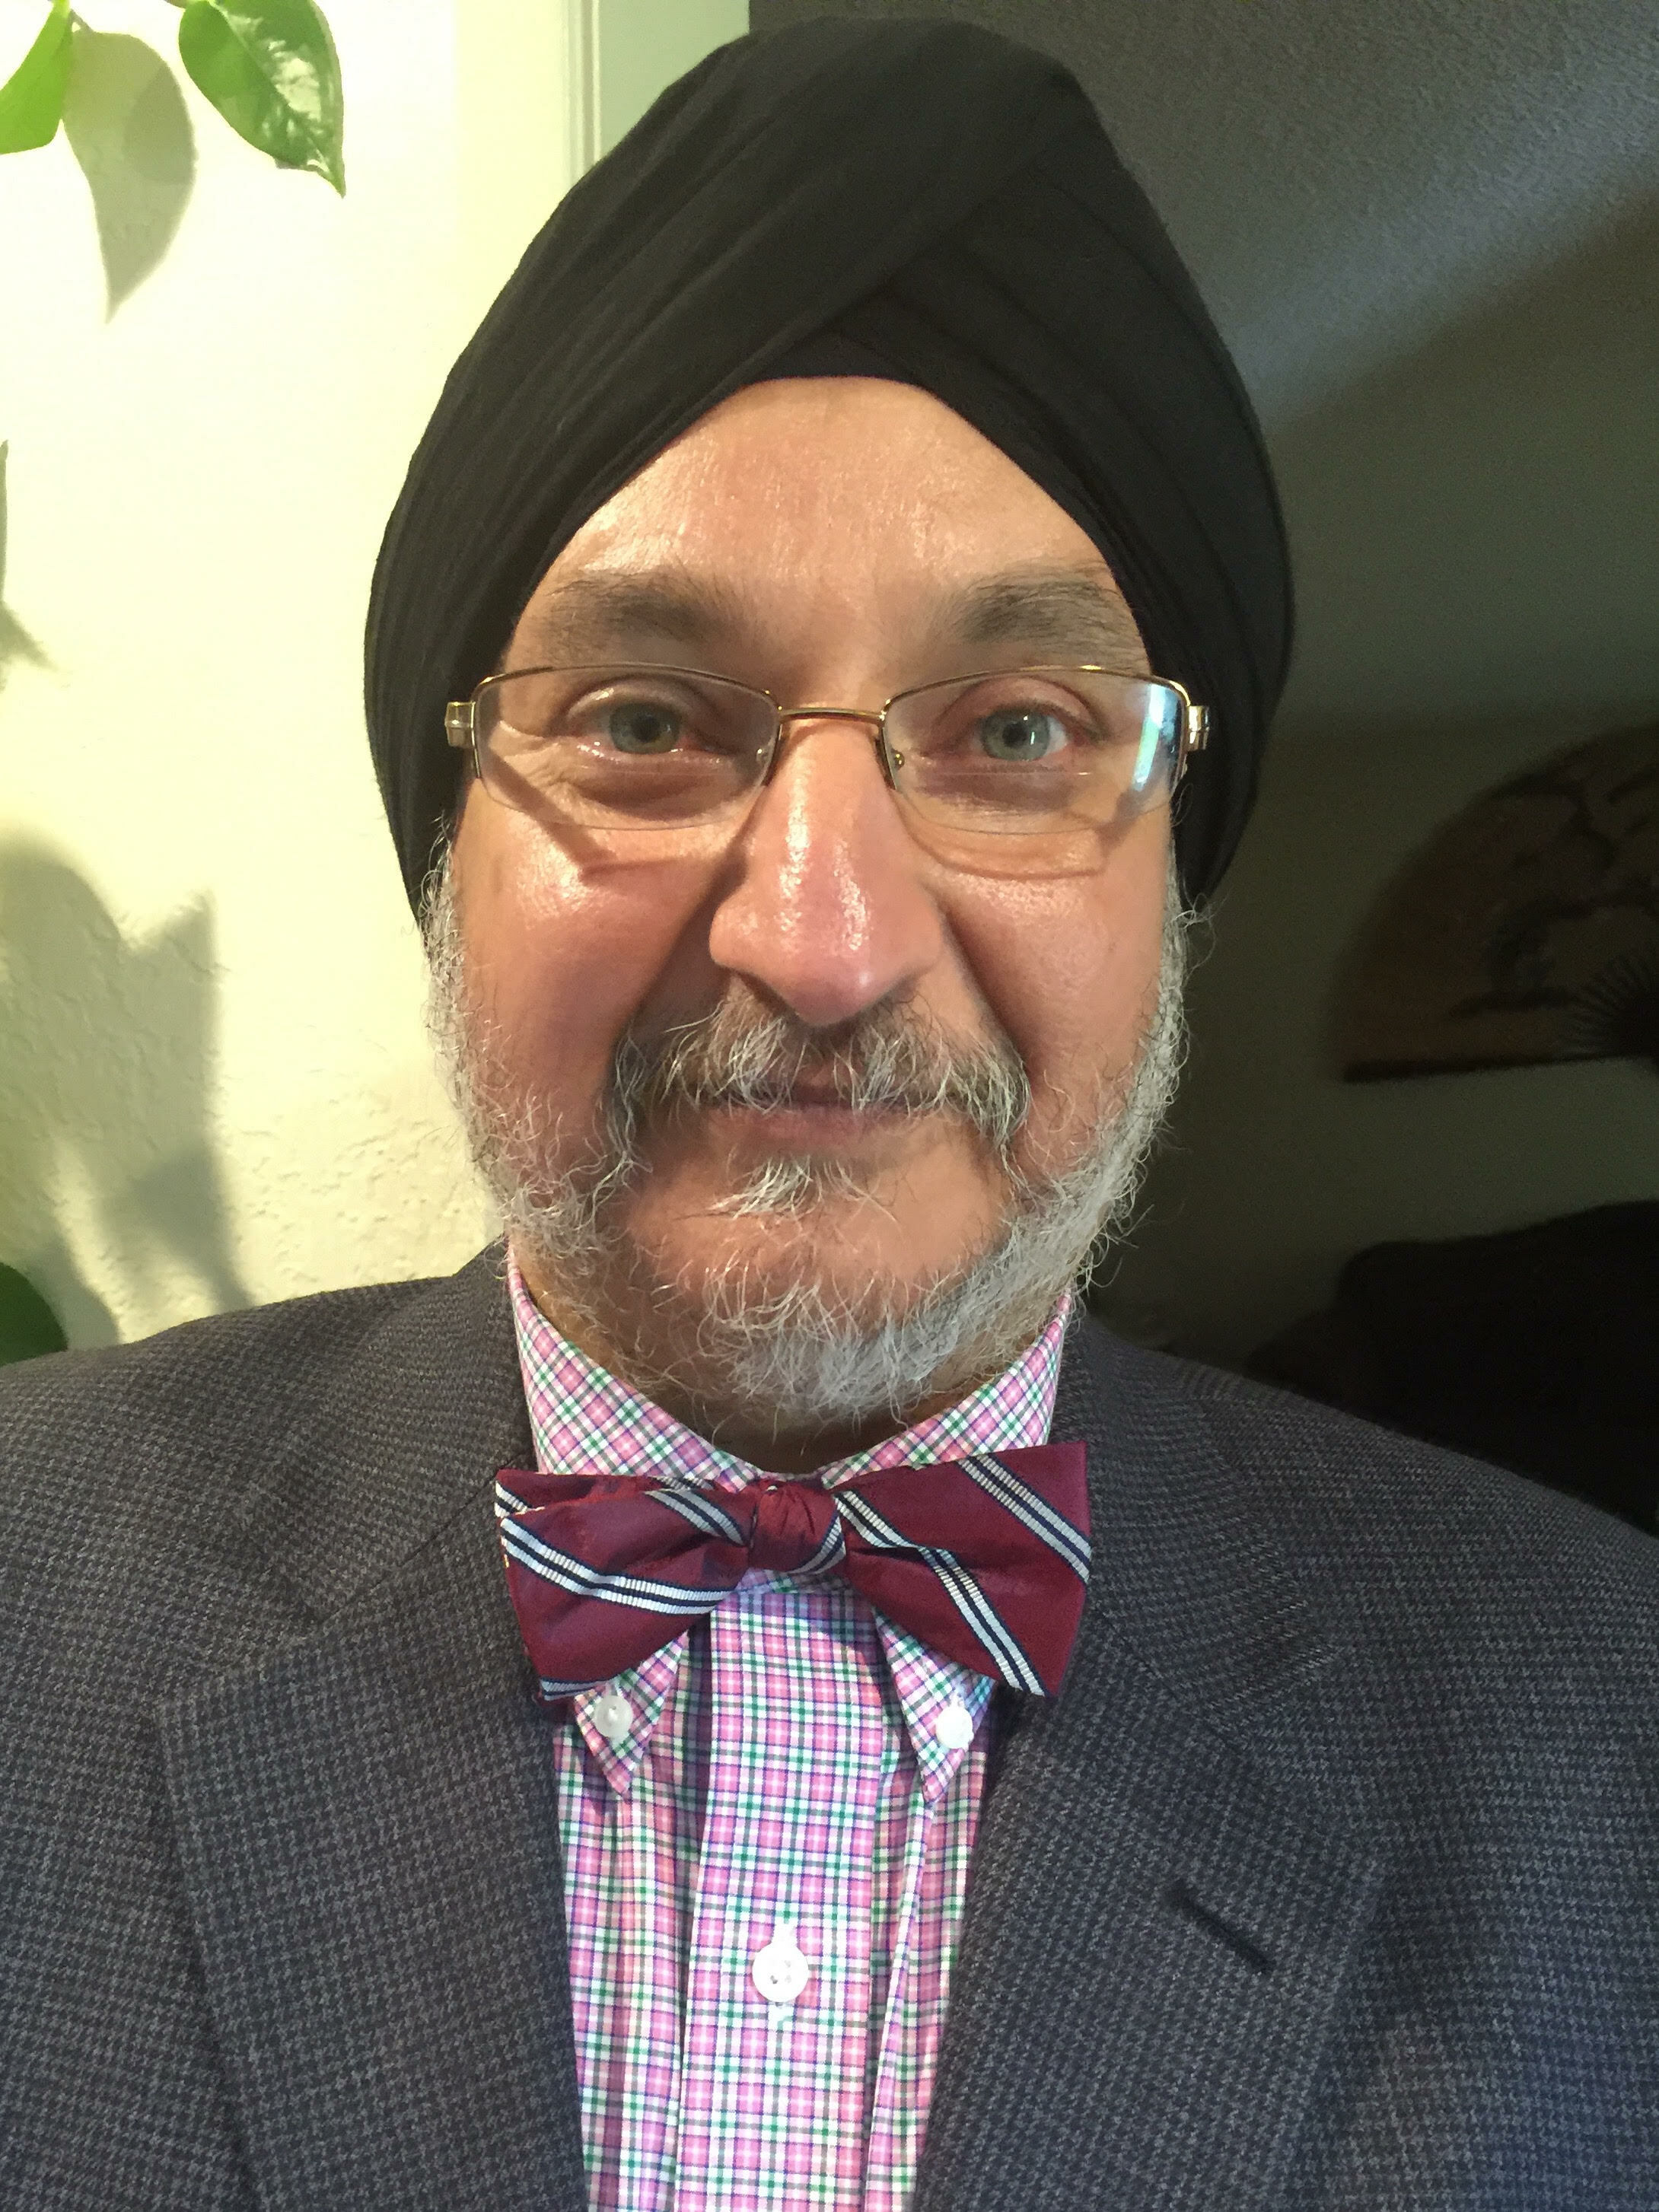 Parmjit Singh, REALTOR® in Walnut Creek, Better Homes and Gardens Reliance Partners